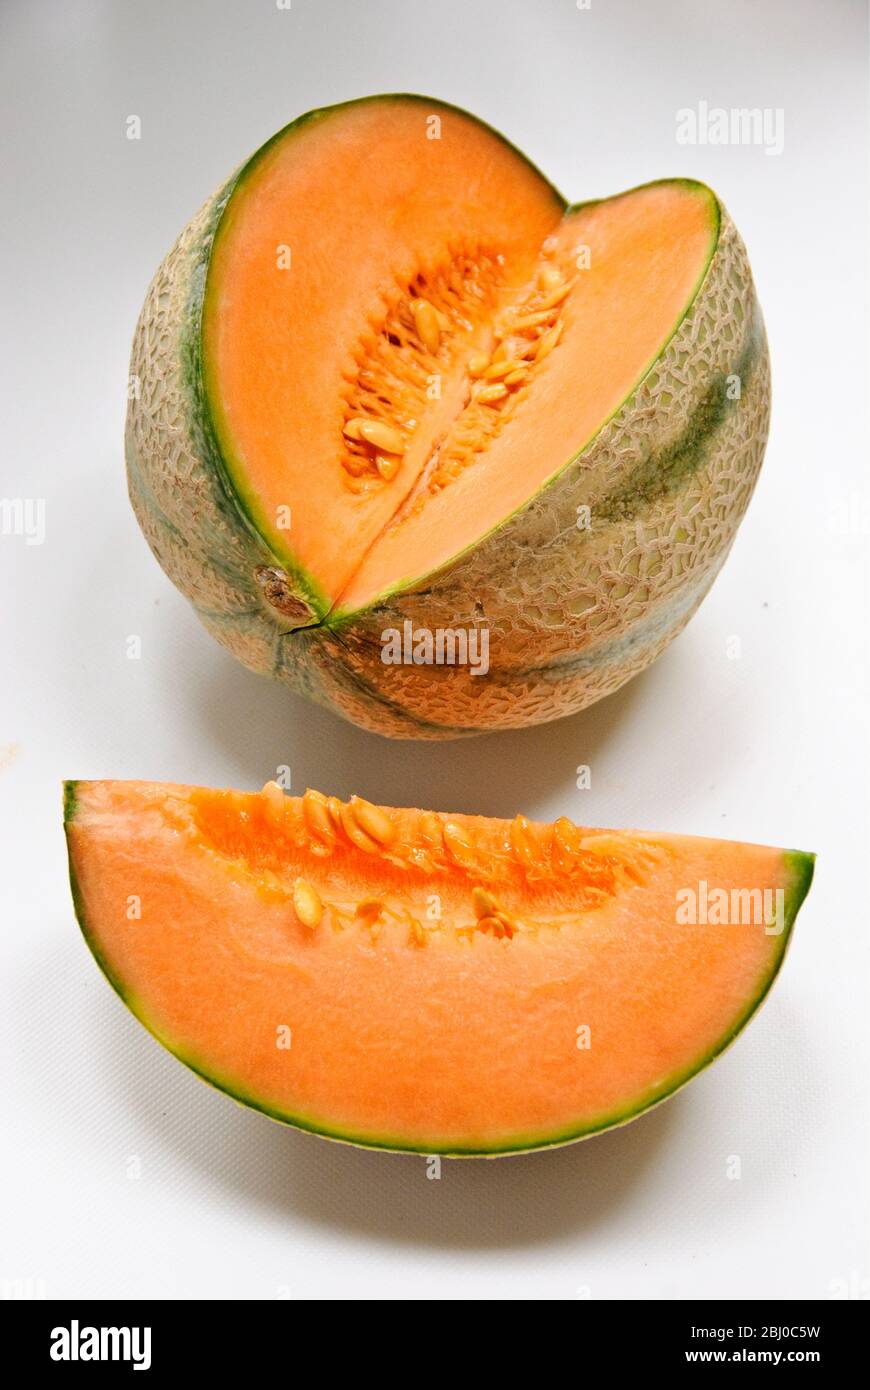 Cantaloupe melon wit section cut out on white background - Stock Photo